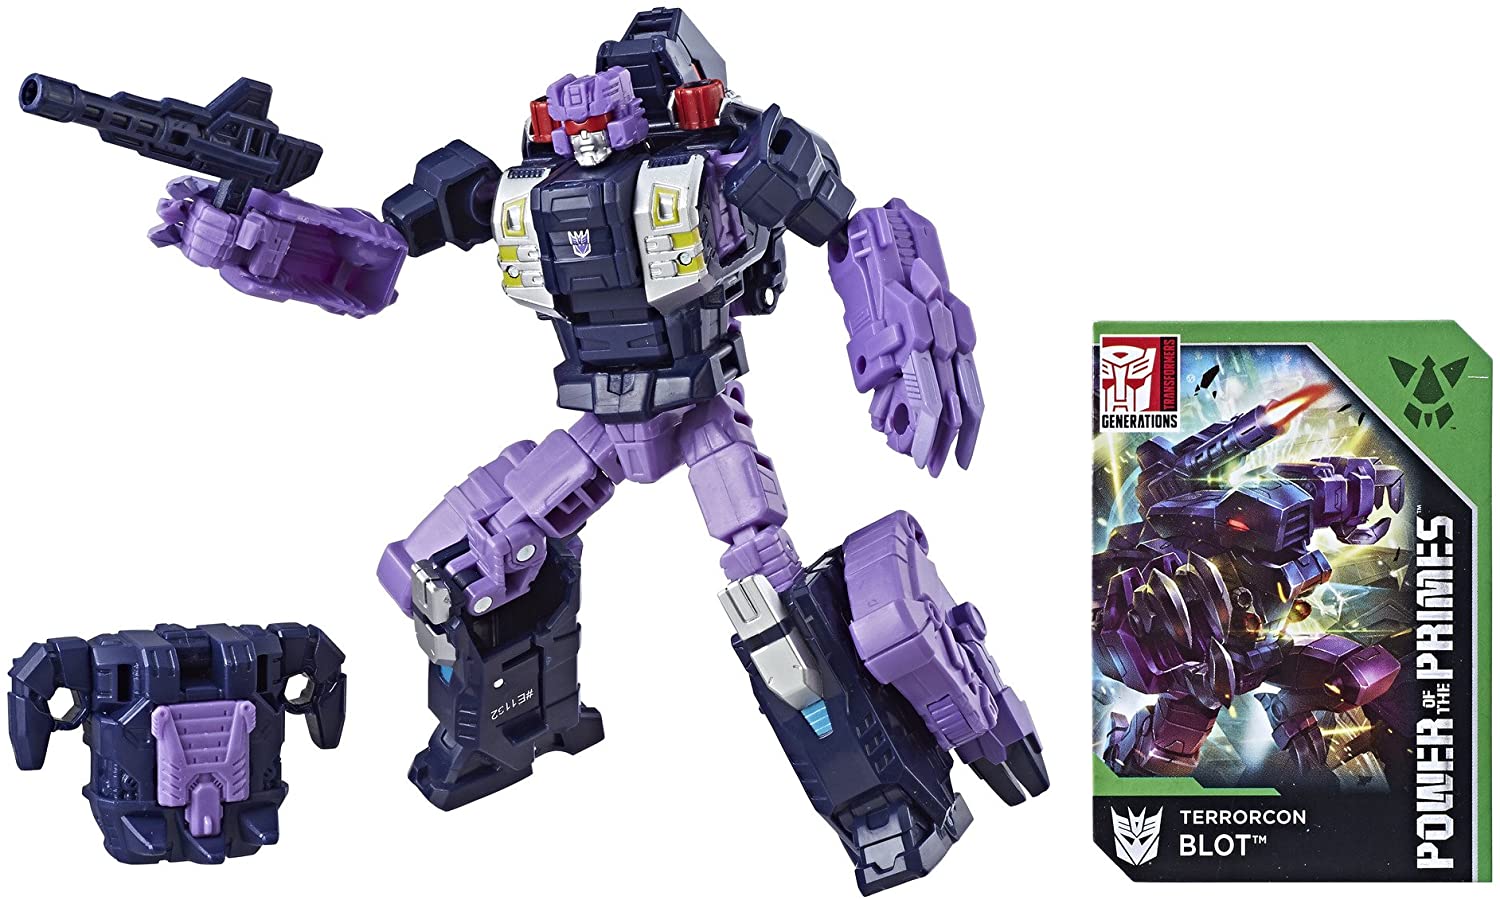 Transformers Generations Power of The Primes Deluxe Class Terrorcon Blot